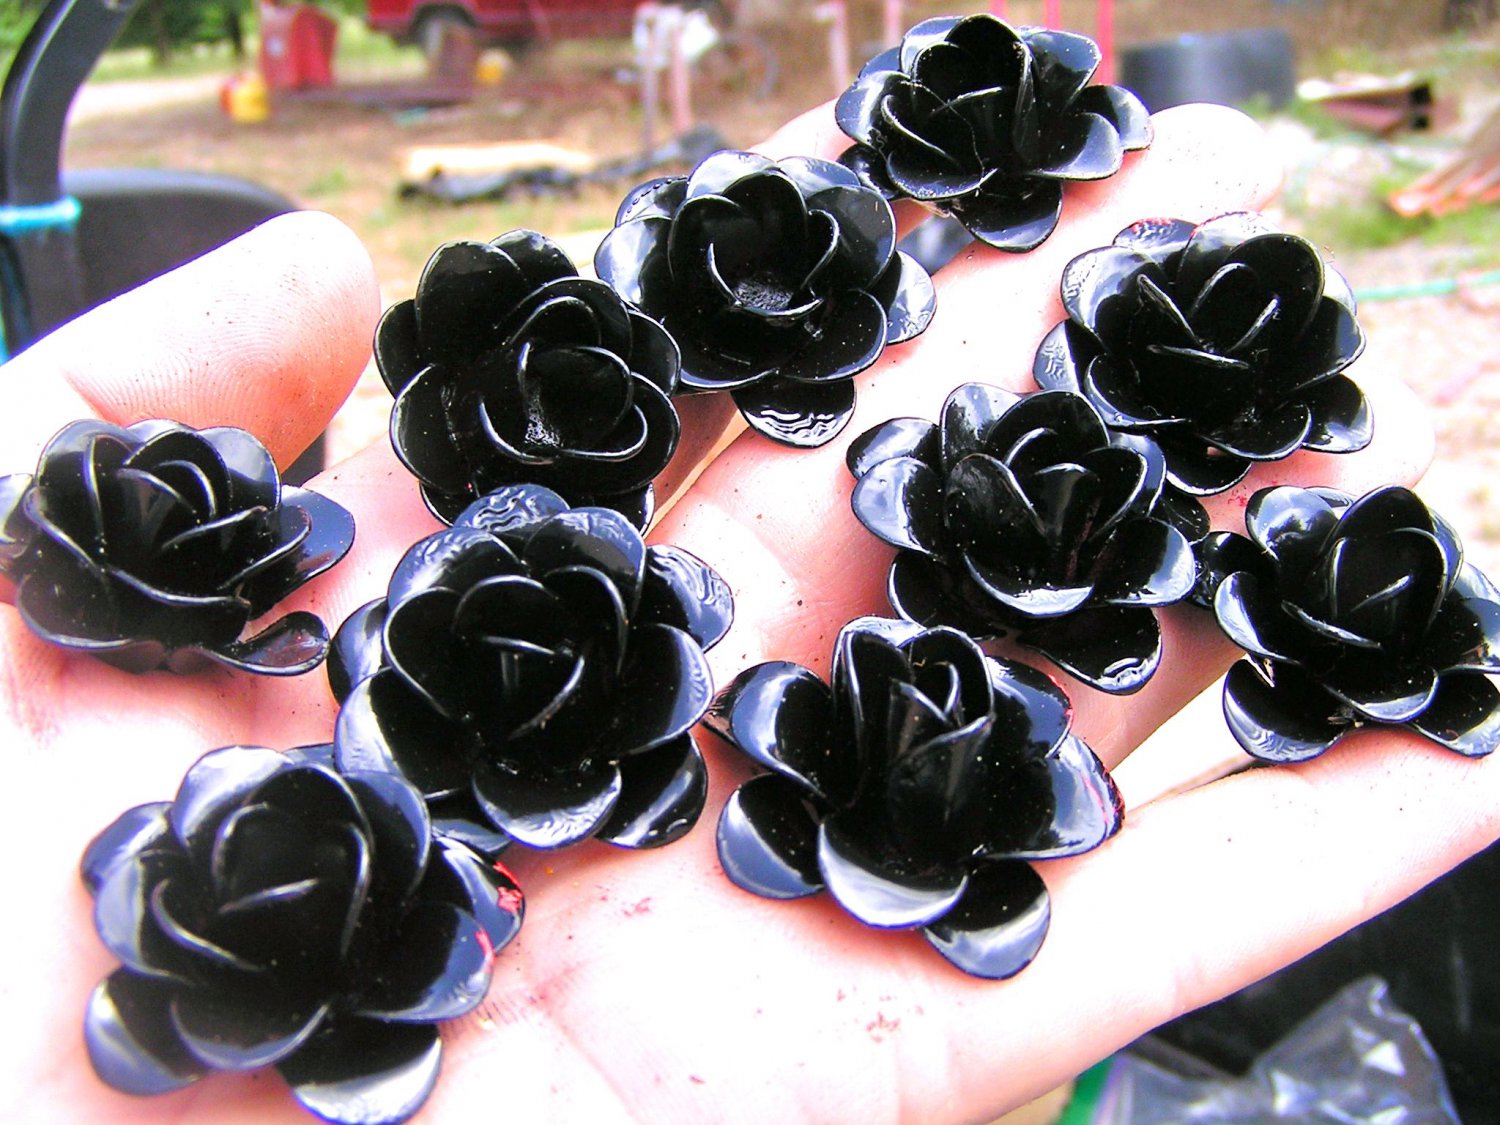 10 metal Black roses flowers for accents, embellishments, crafting, arrangements